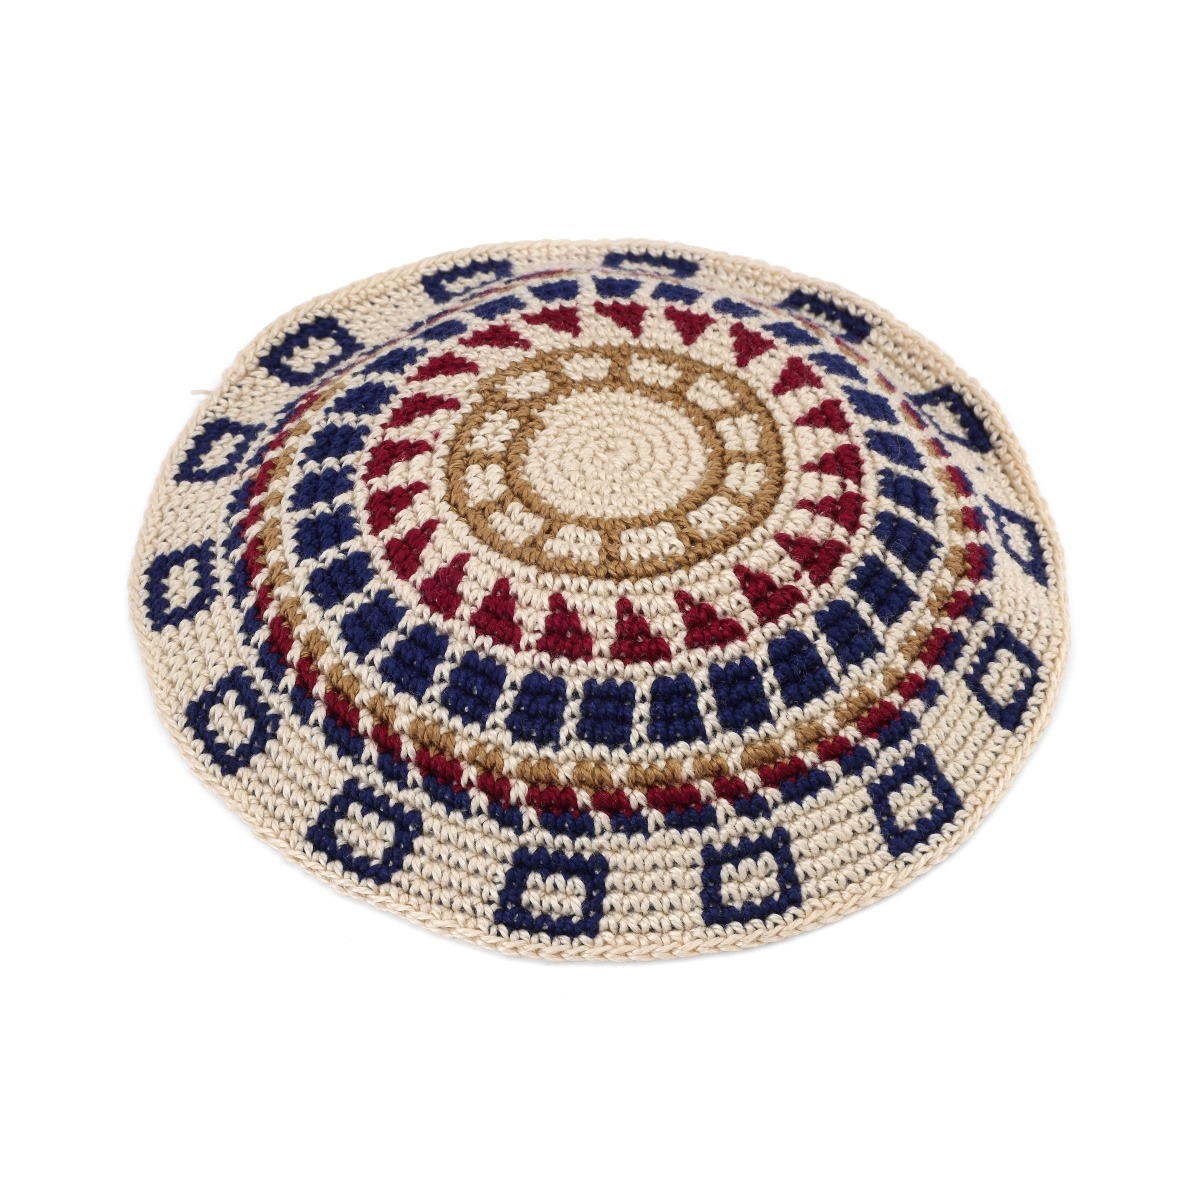 High-Quality Knitted Beige Kippah with Brown, Navy Blue and Bordeaux Design - 1